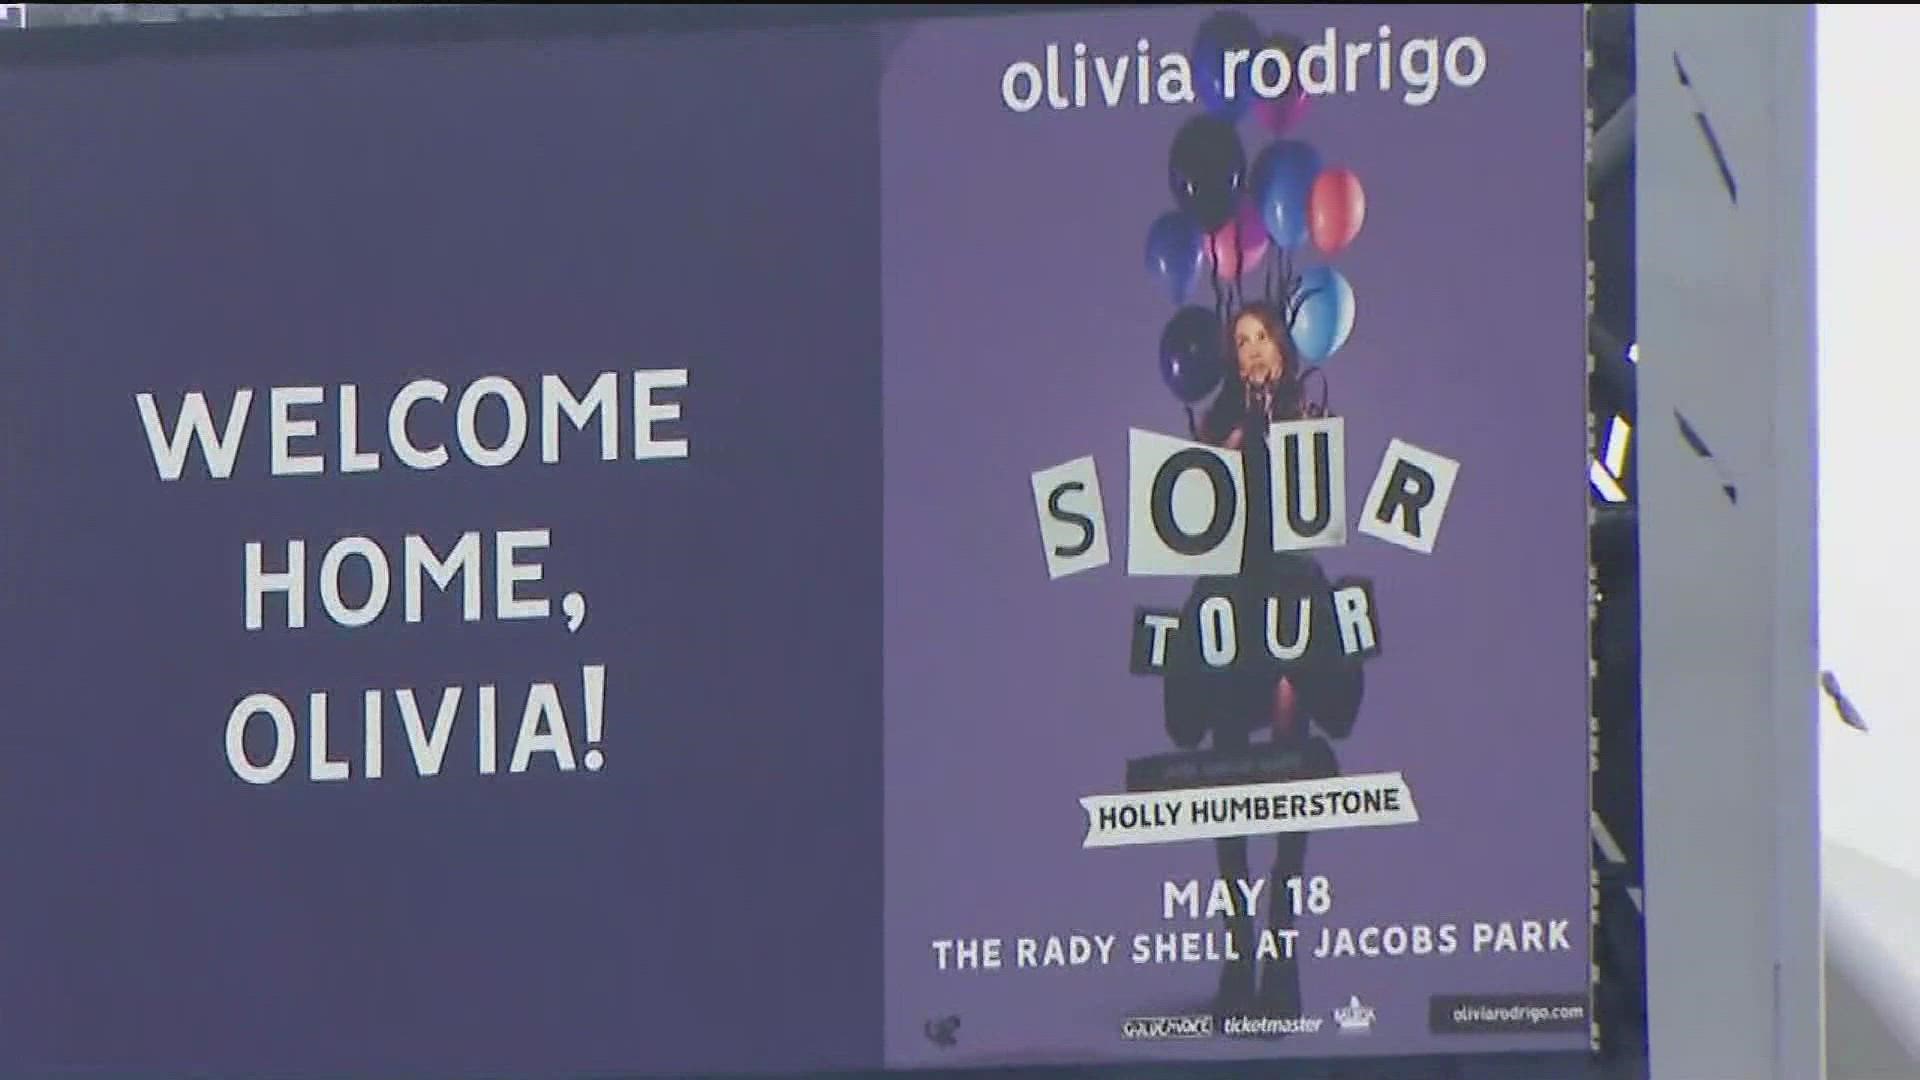 Fans showed up to the Rady Shell at Jacobs Park in full force on Wednesday, waiting for hours to see Olivia Rodrigo perform.